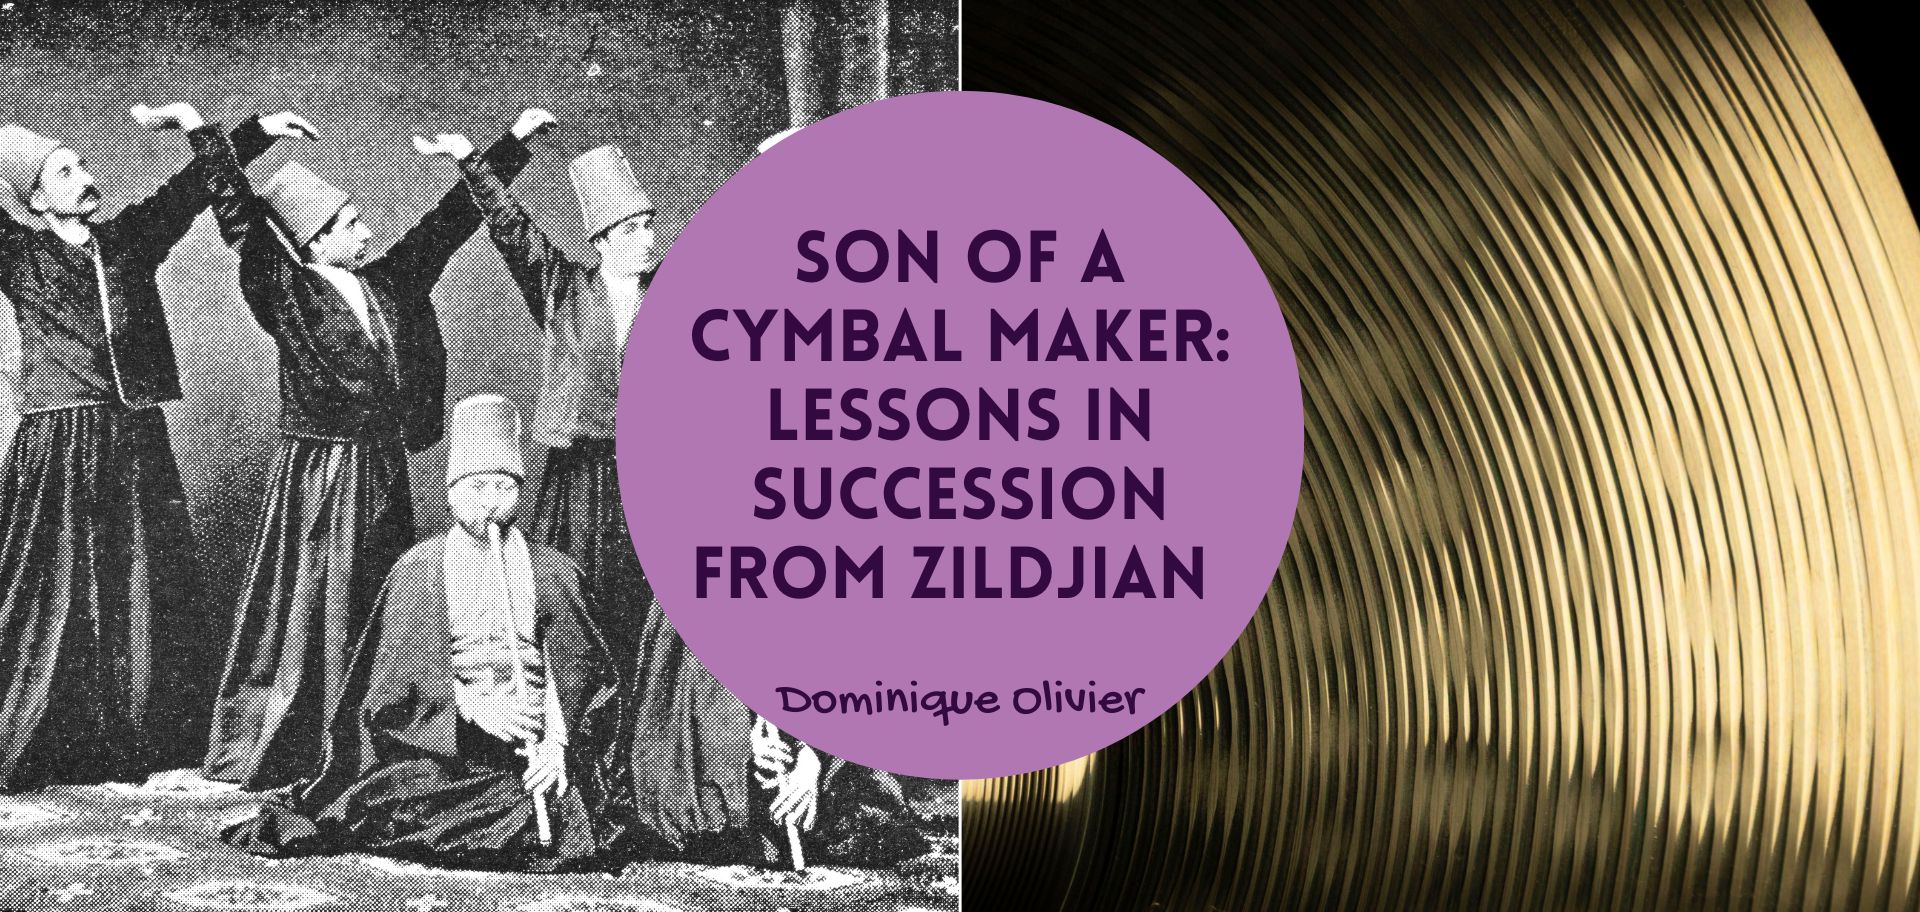 Son of a cymbal maker: lessons in succession from Zildjian